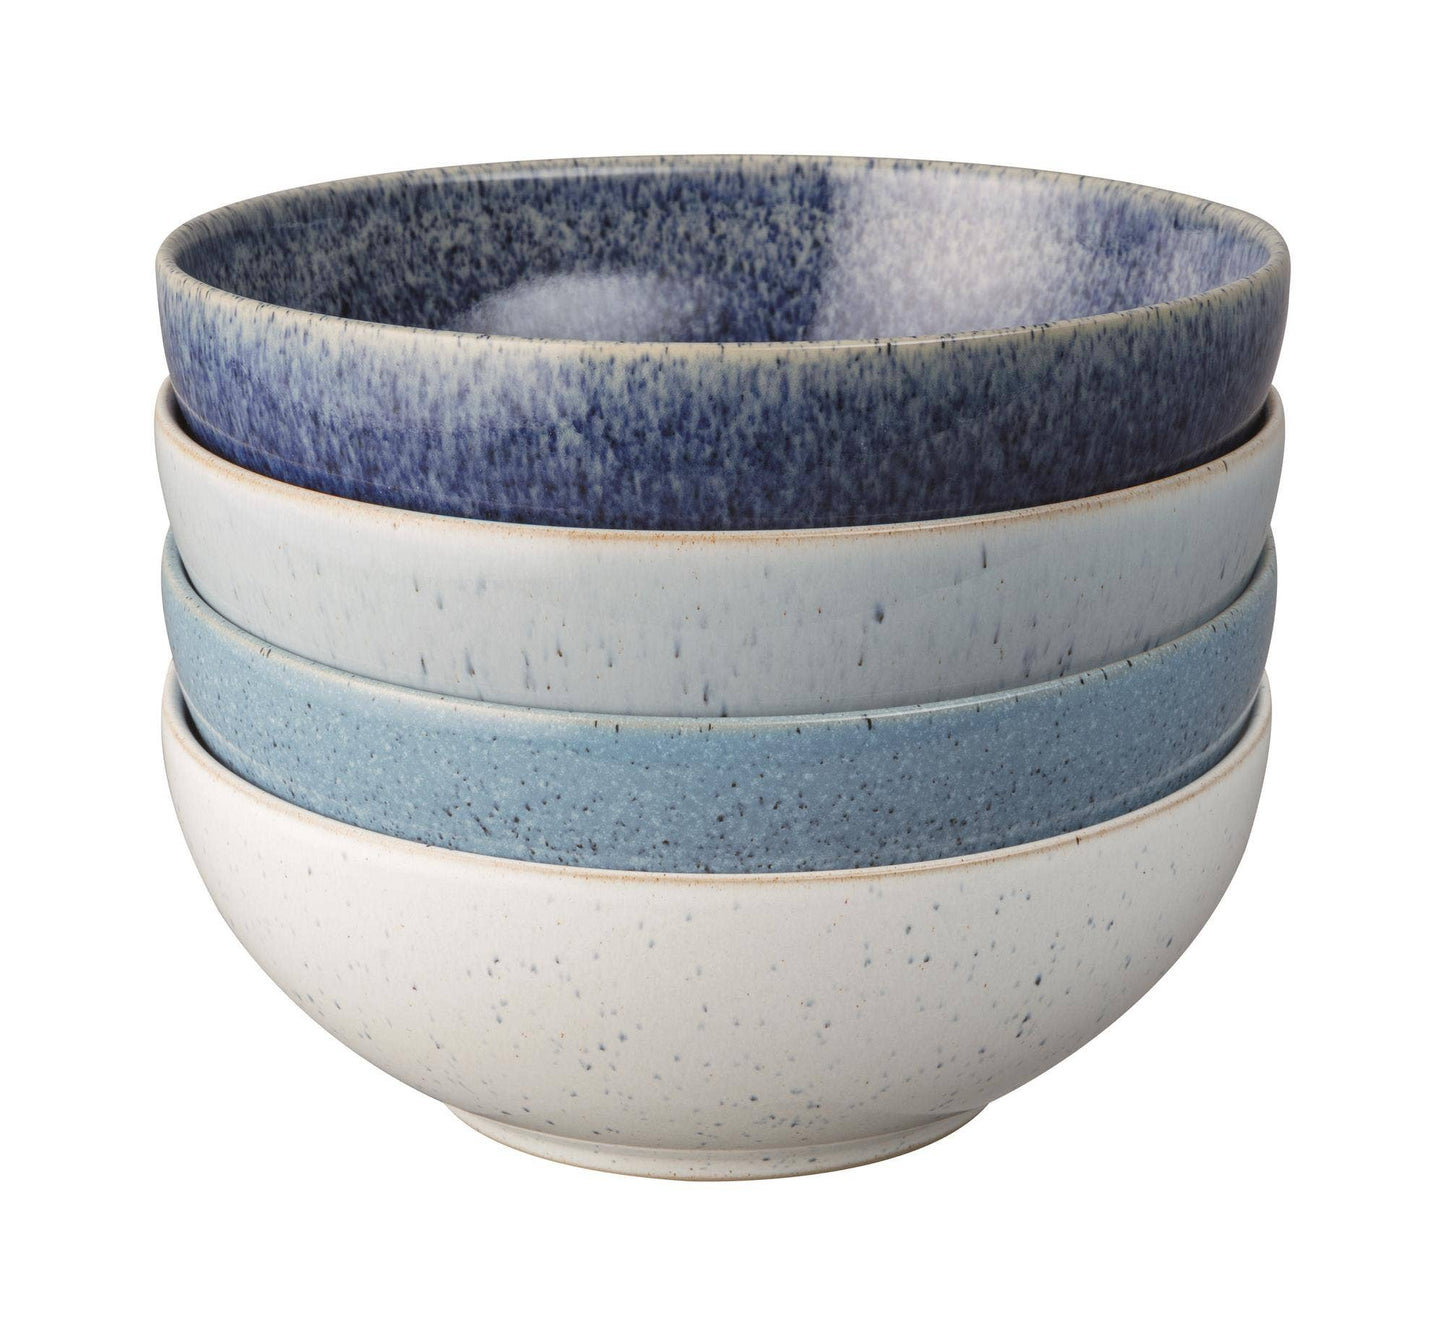 Studio Blue Cereal Bowls by Denby (Sold Individually)